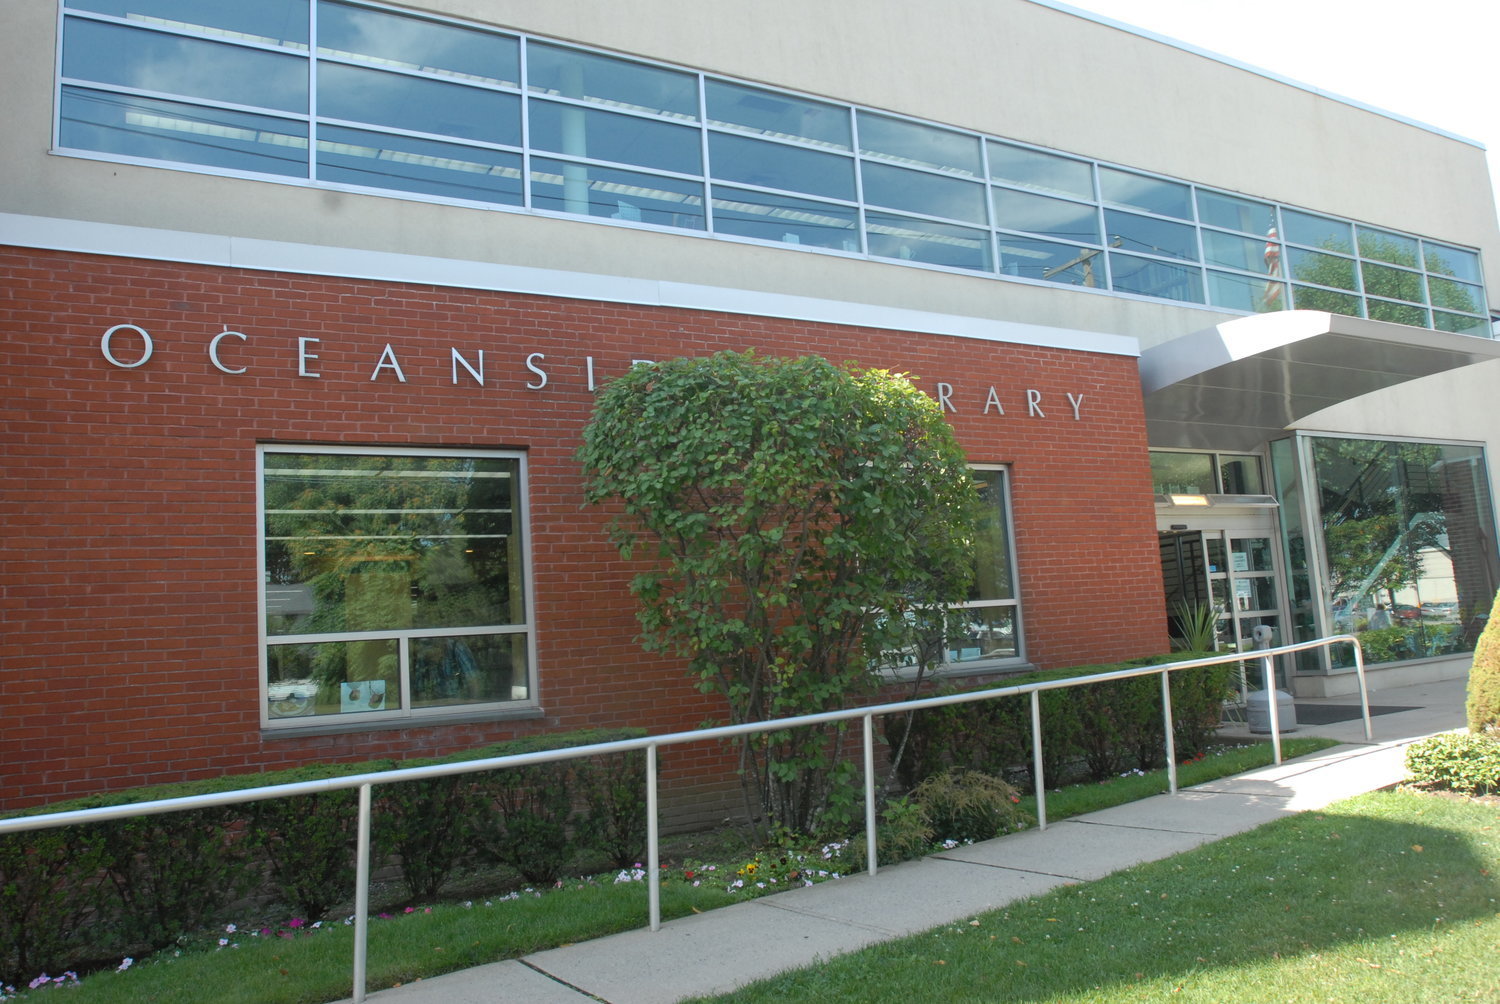 Though the building has been closed since March 13, the Oceanside Library has created several online programs to keep residents active during the coronavirus pandemic.